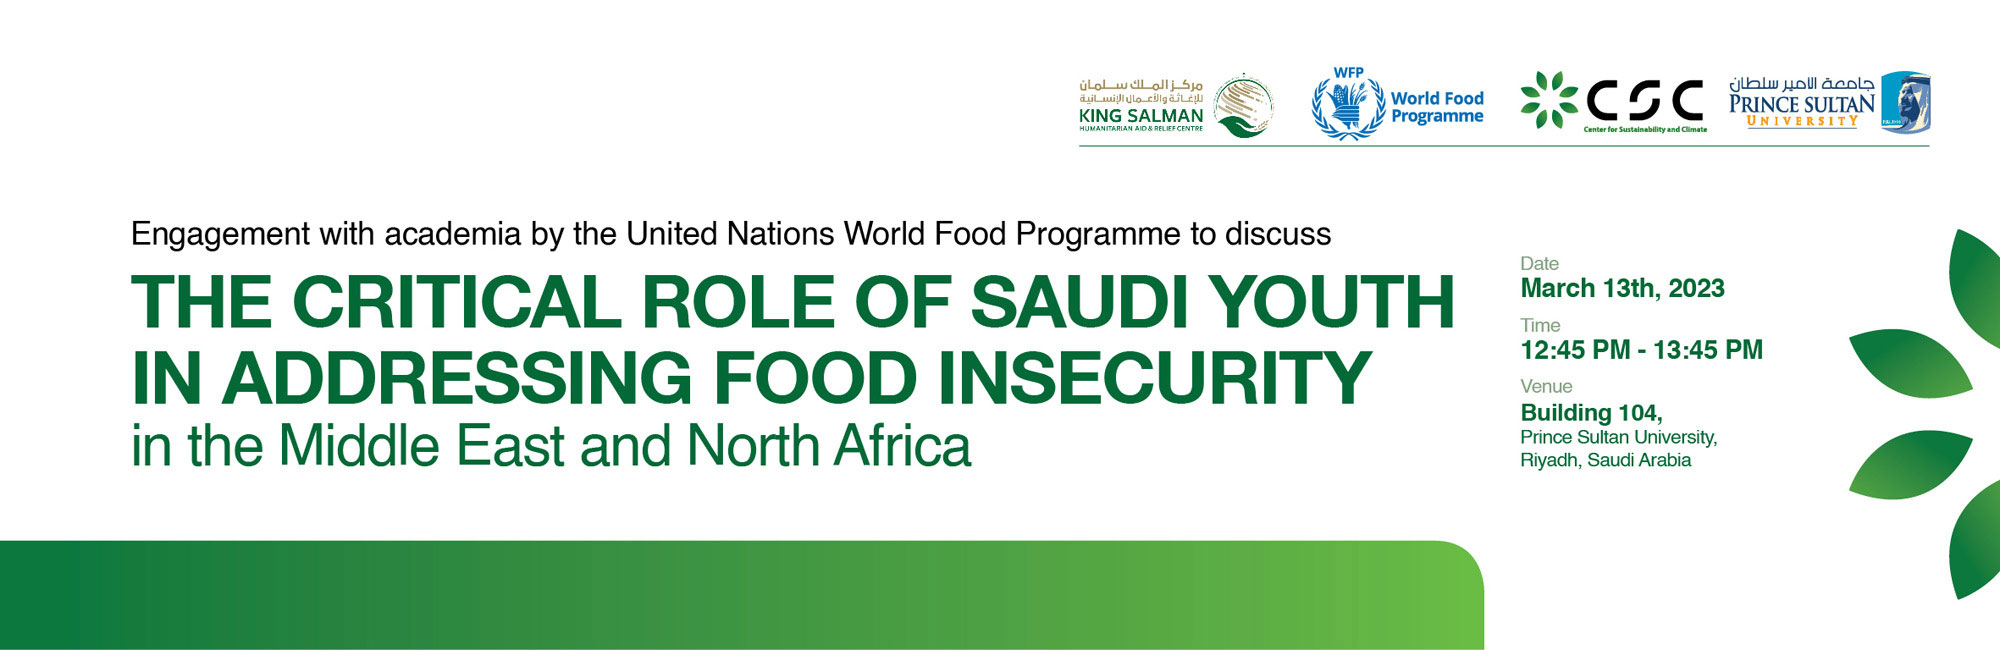 Engagement with academia by the United Nations World Food Programme to discuss - The critical role of Saudi Youth in Addressing Food Insecurity in the Middle East and North Africa